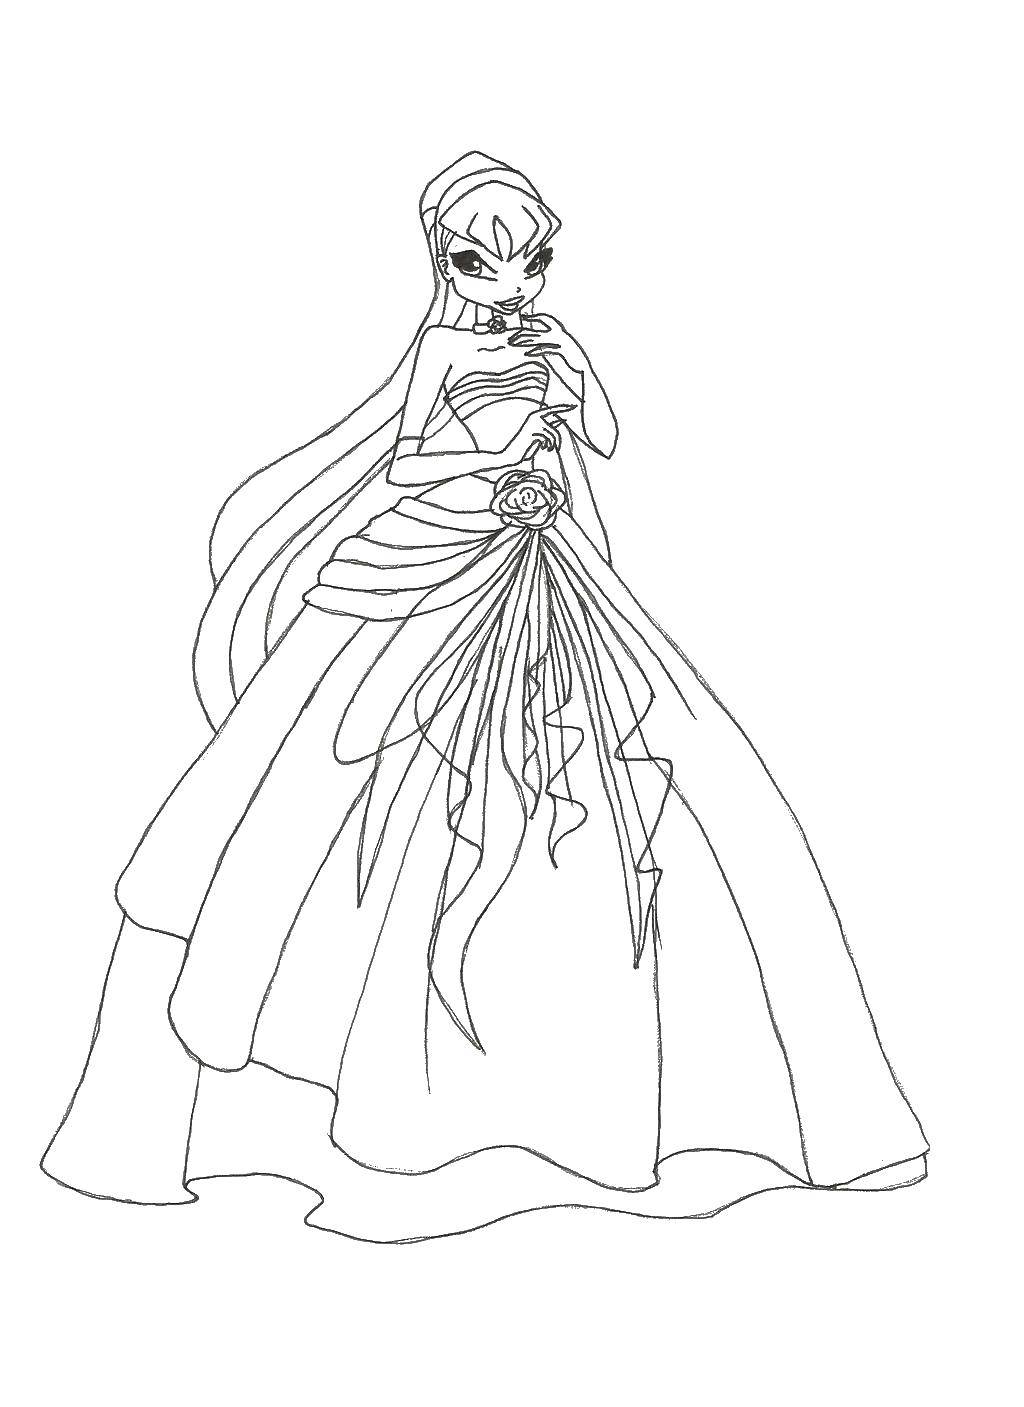 Coloring Stella in a ball gown. Category Winx. Tags:  Character cartoon, Winx.